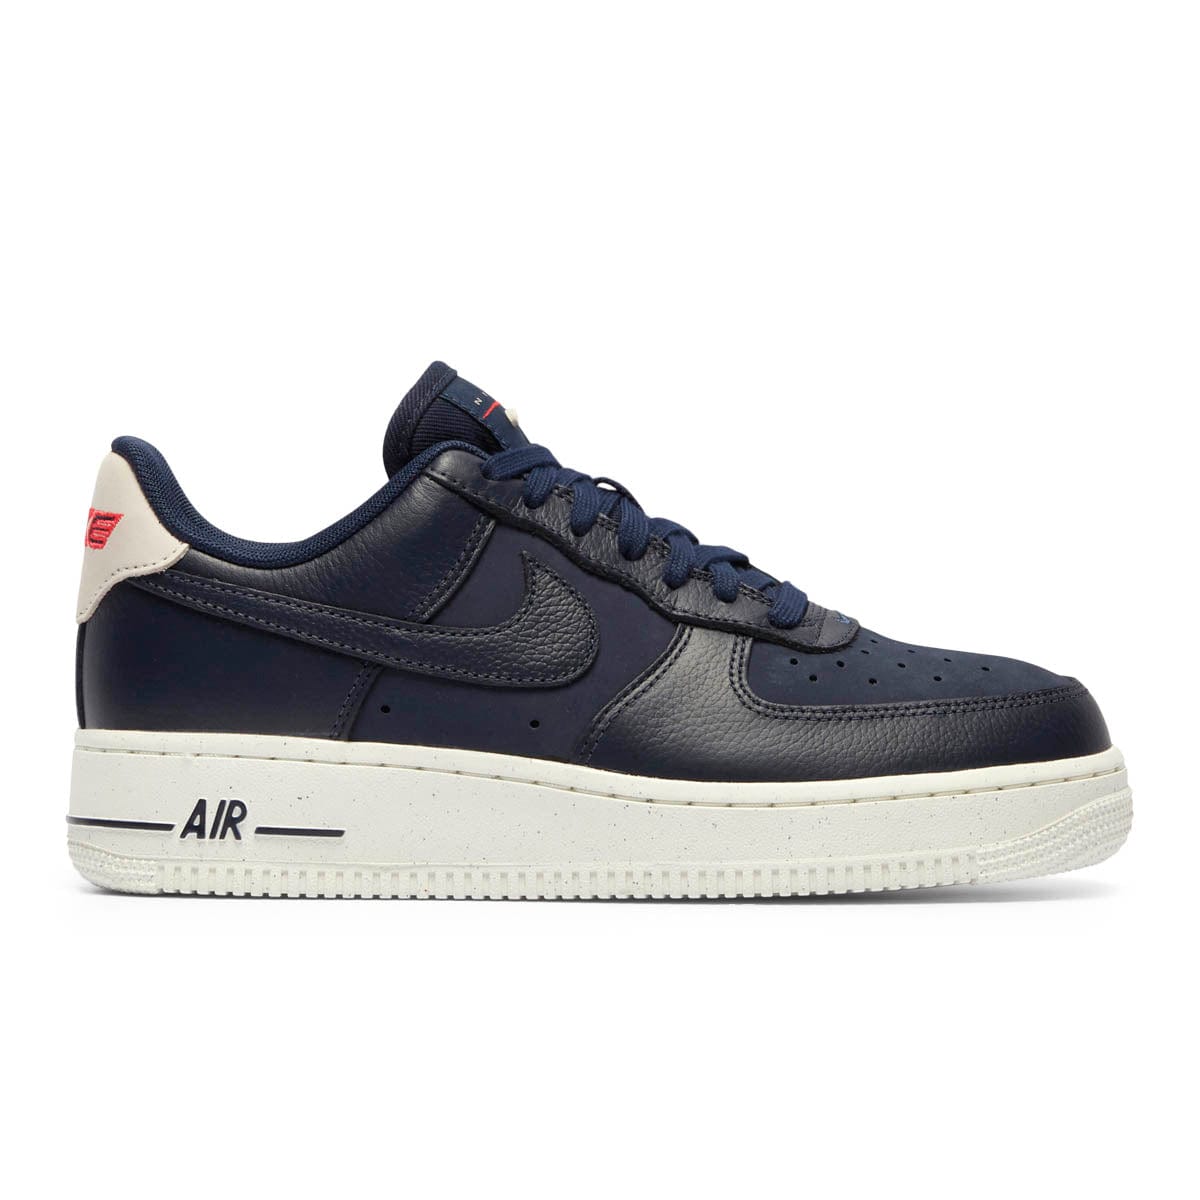 Nike Air Force 1 '07 LV8 White / Black / Obsidian Low Top Sneakers